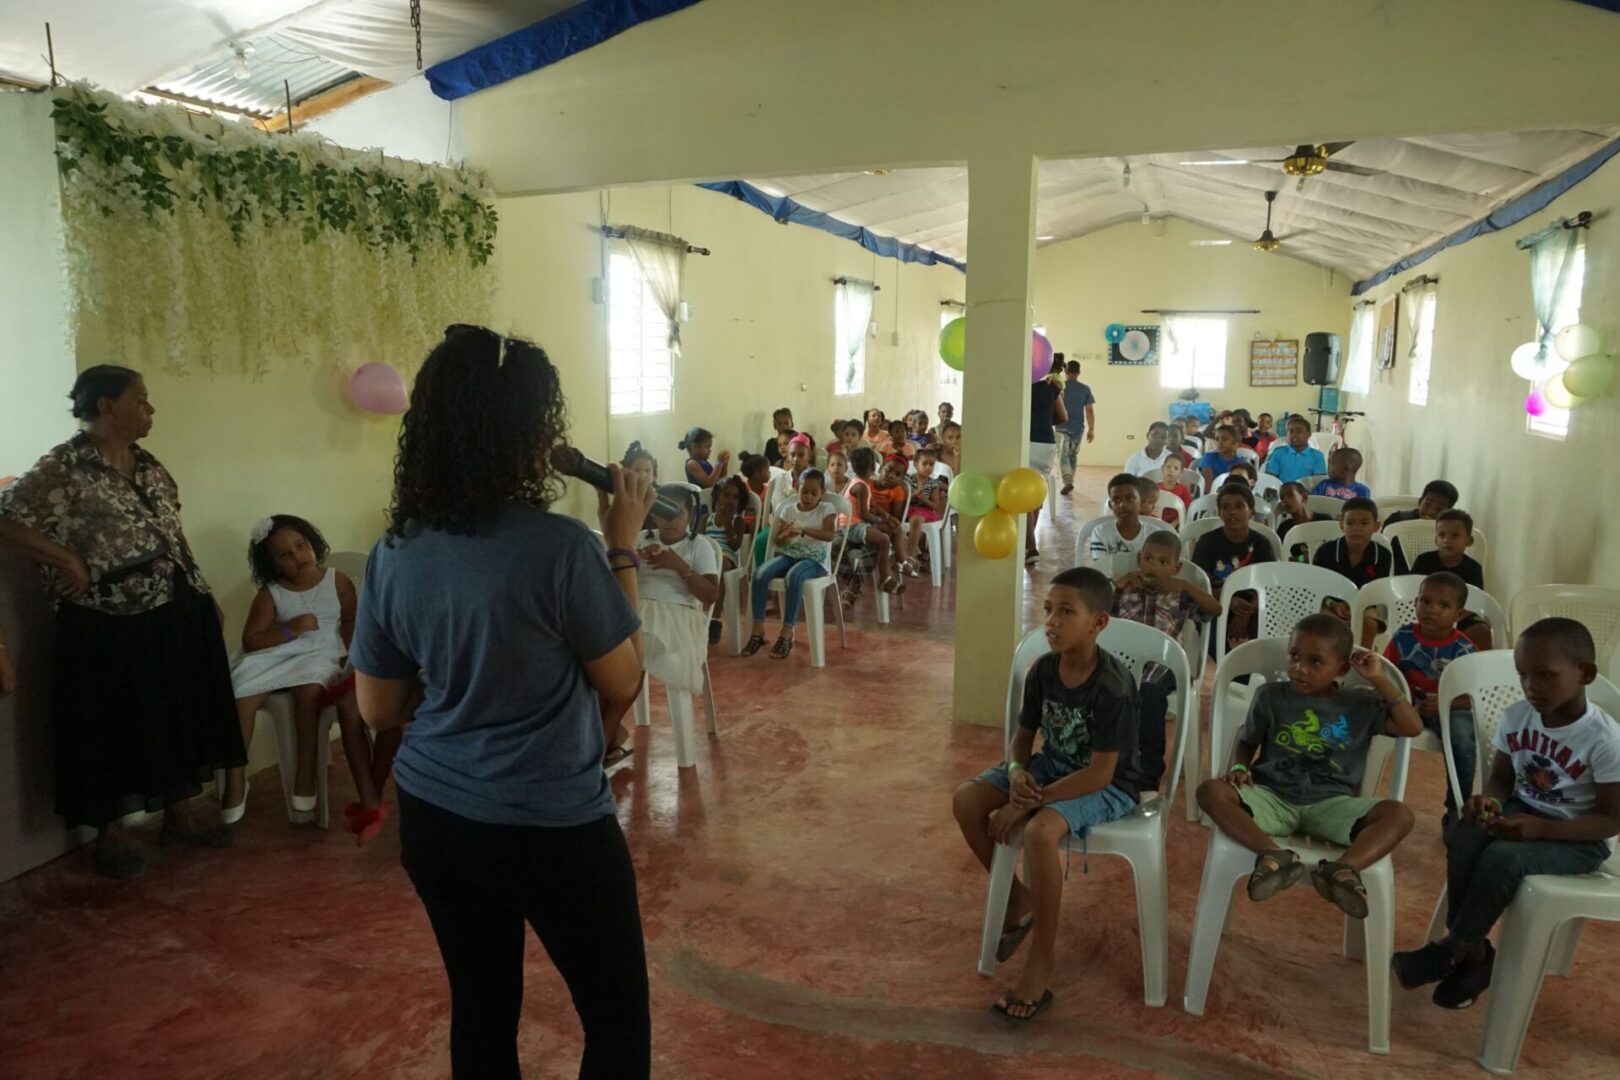 A woman talking into a mic in front of the children in the church